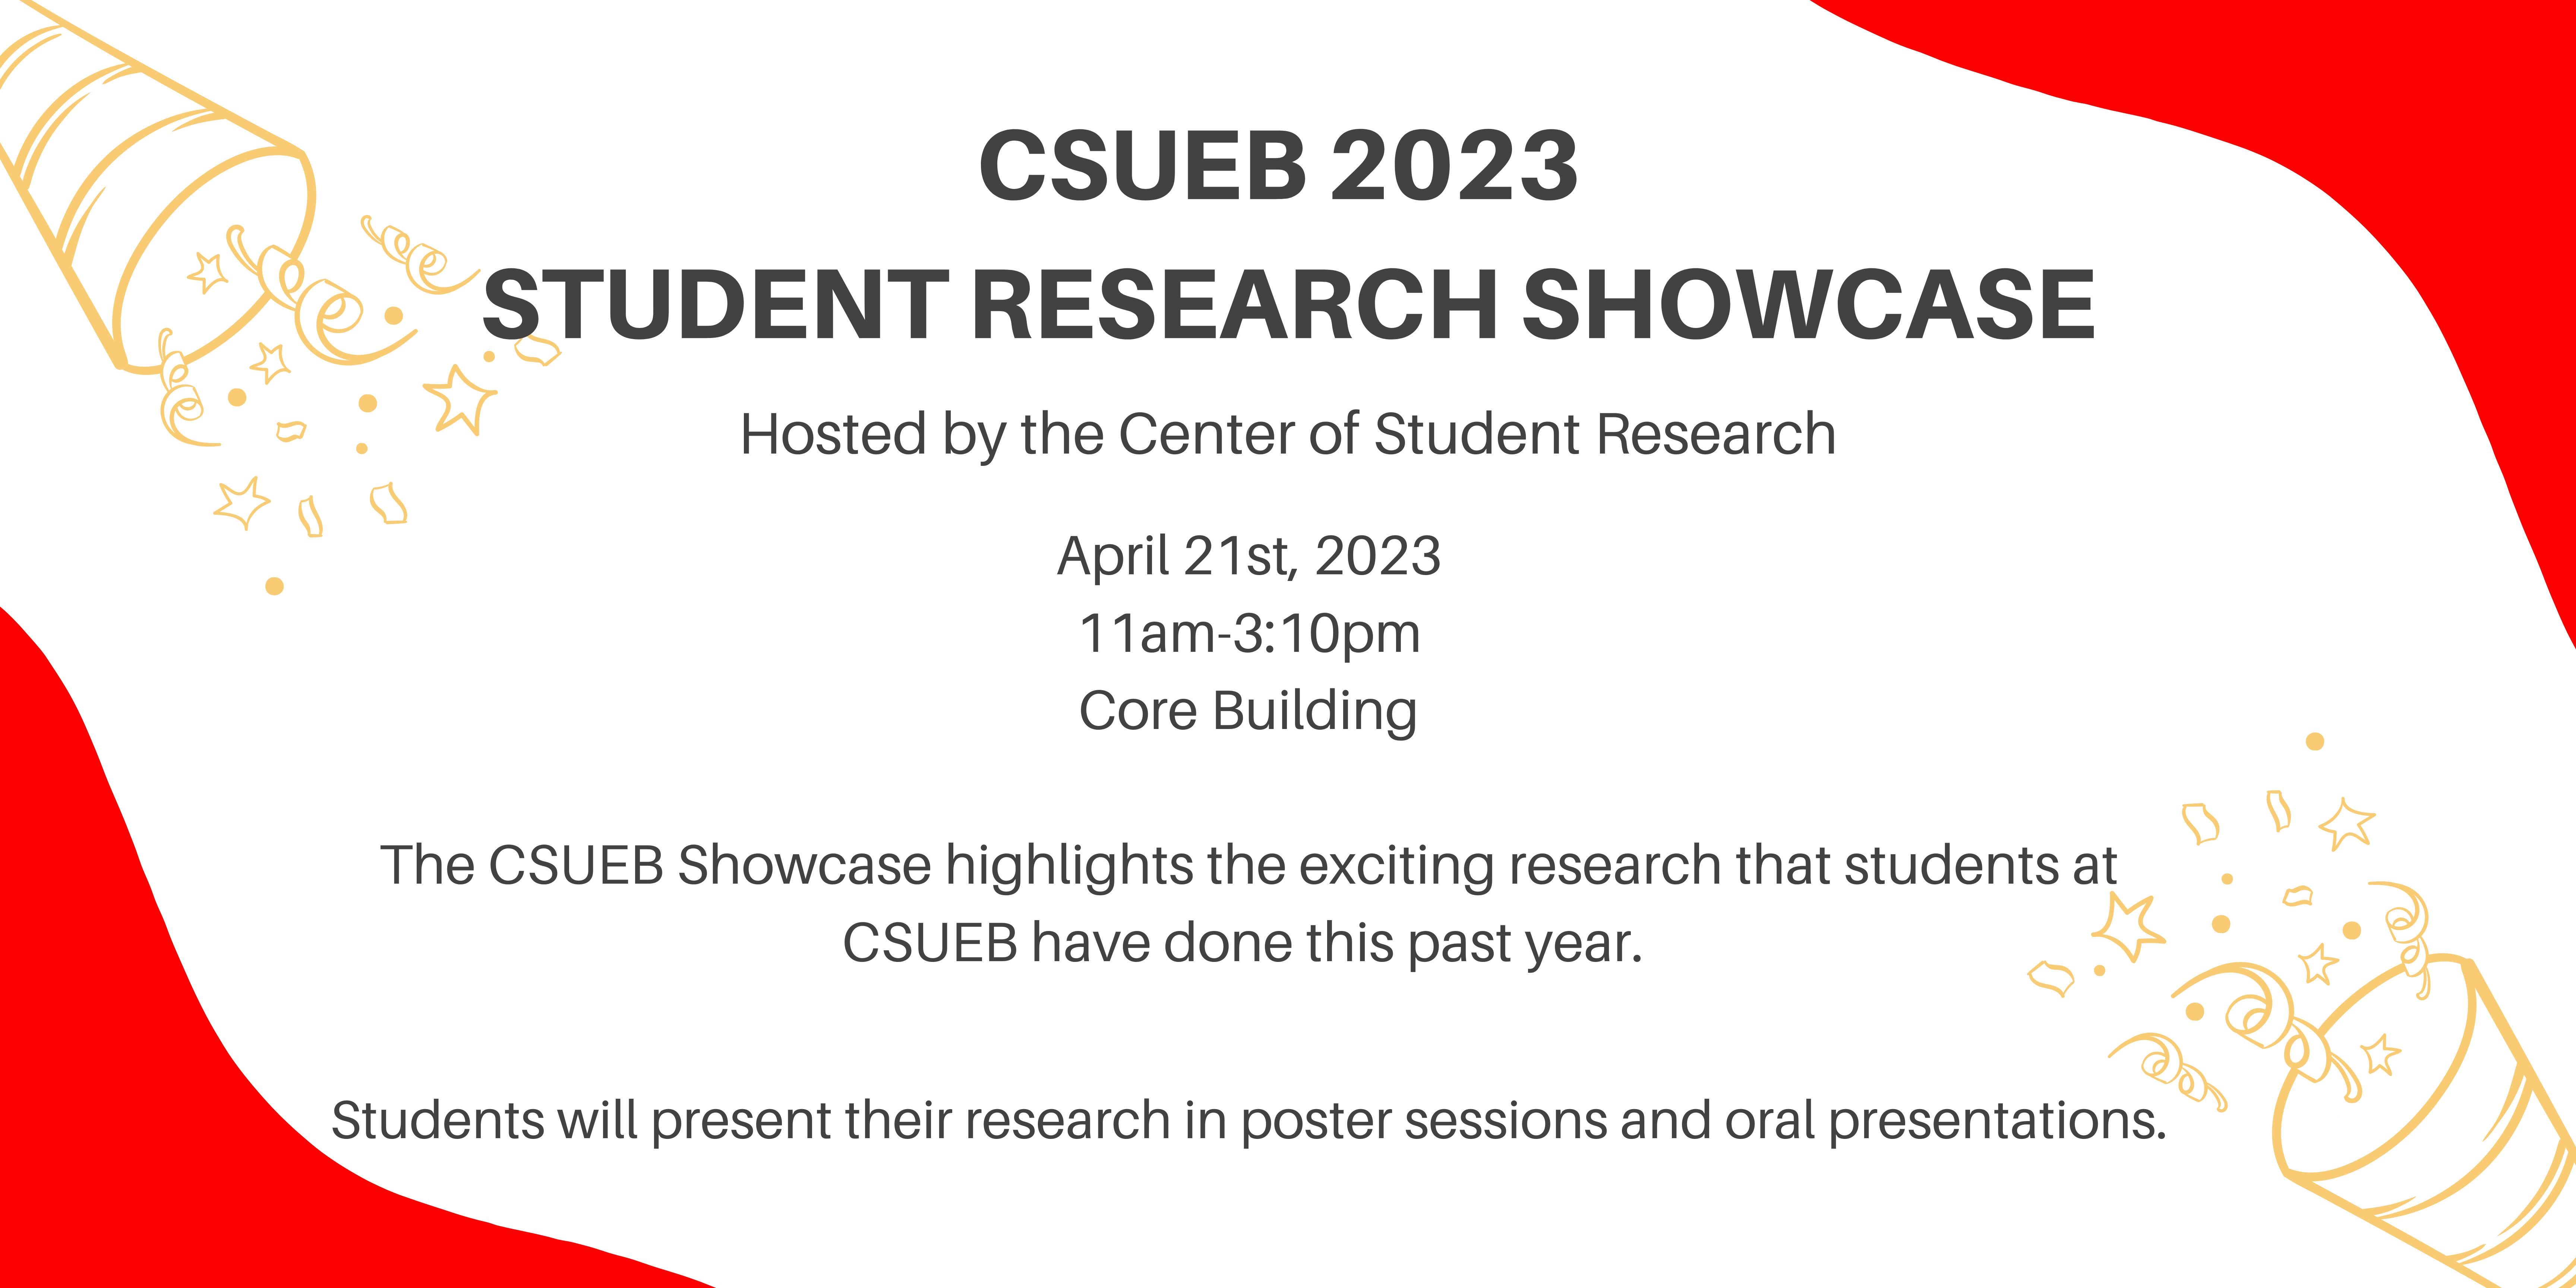 CSUEB 2023 Showcase. April 21st, 2023. 11am-3:10pm. CORE Building. The CSUEB Showcase highlights the exciting research that students at CSUEB have done this past year.  Students will present their research in poster sessions and oral presentations.